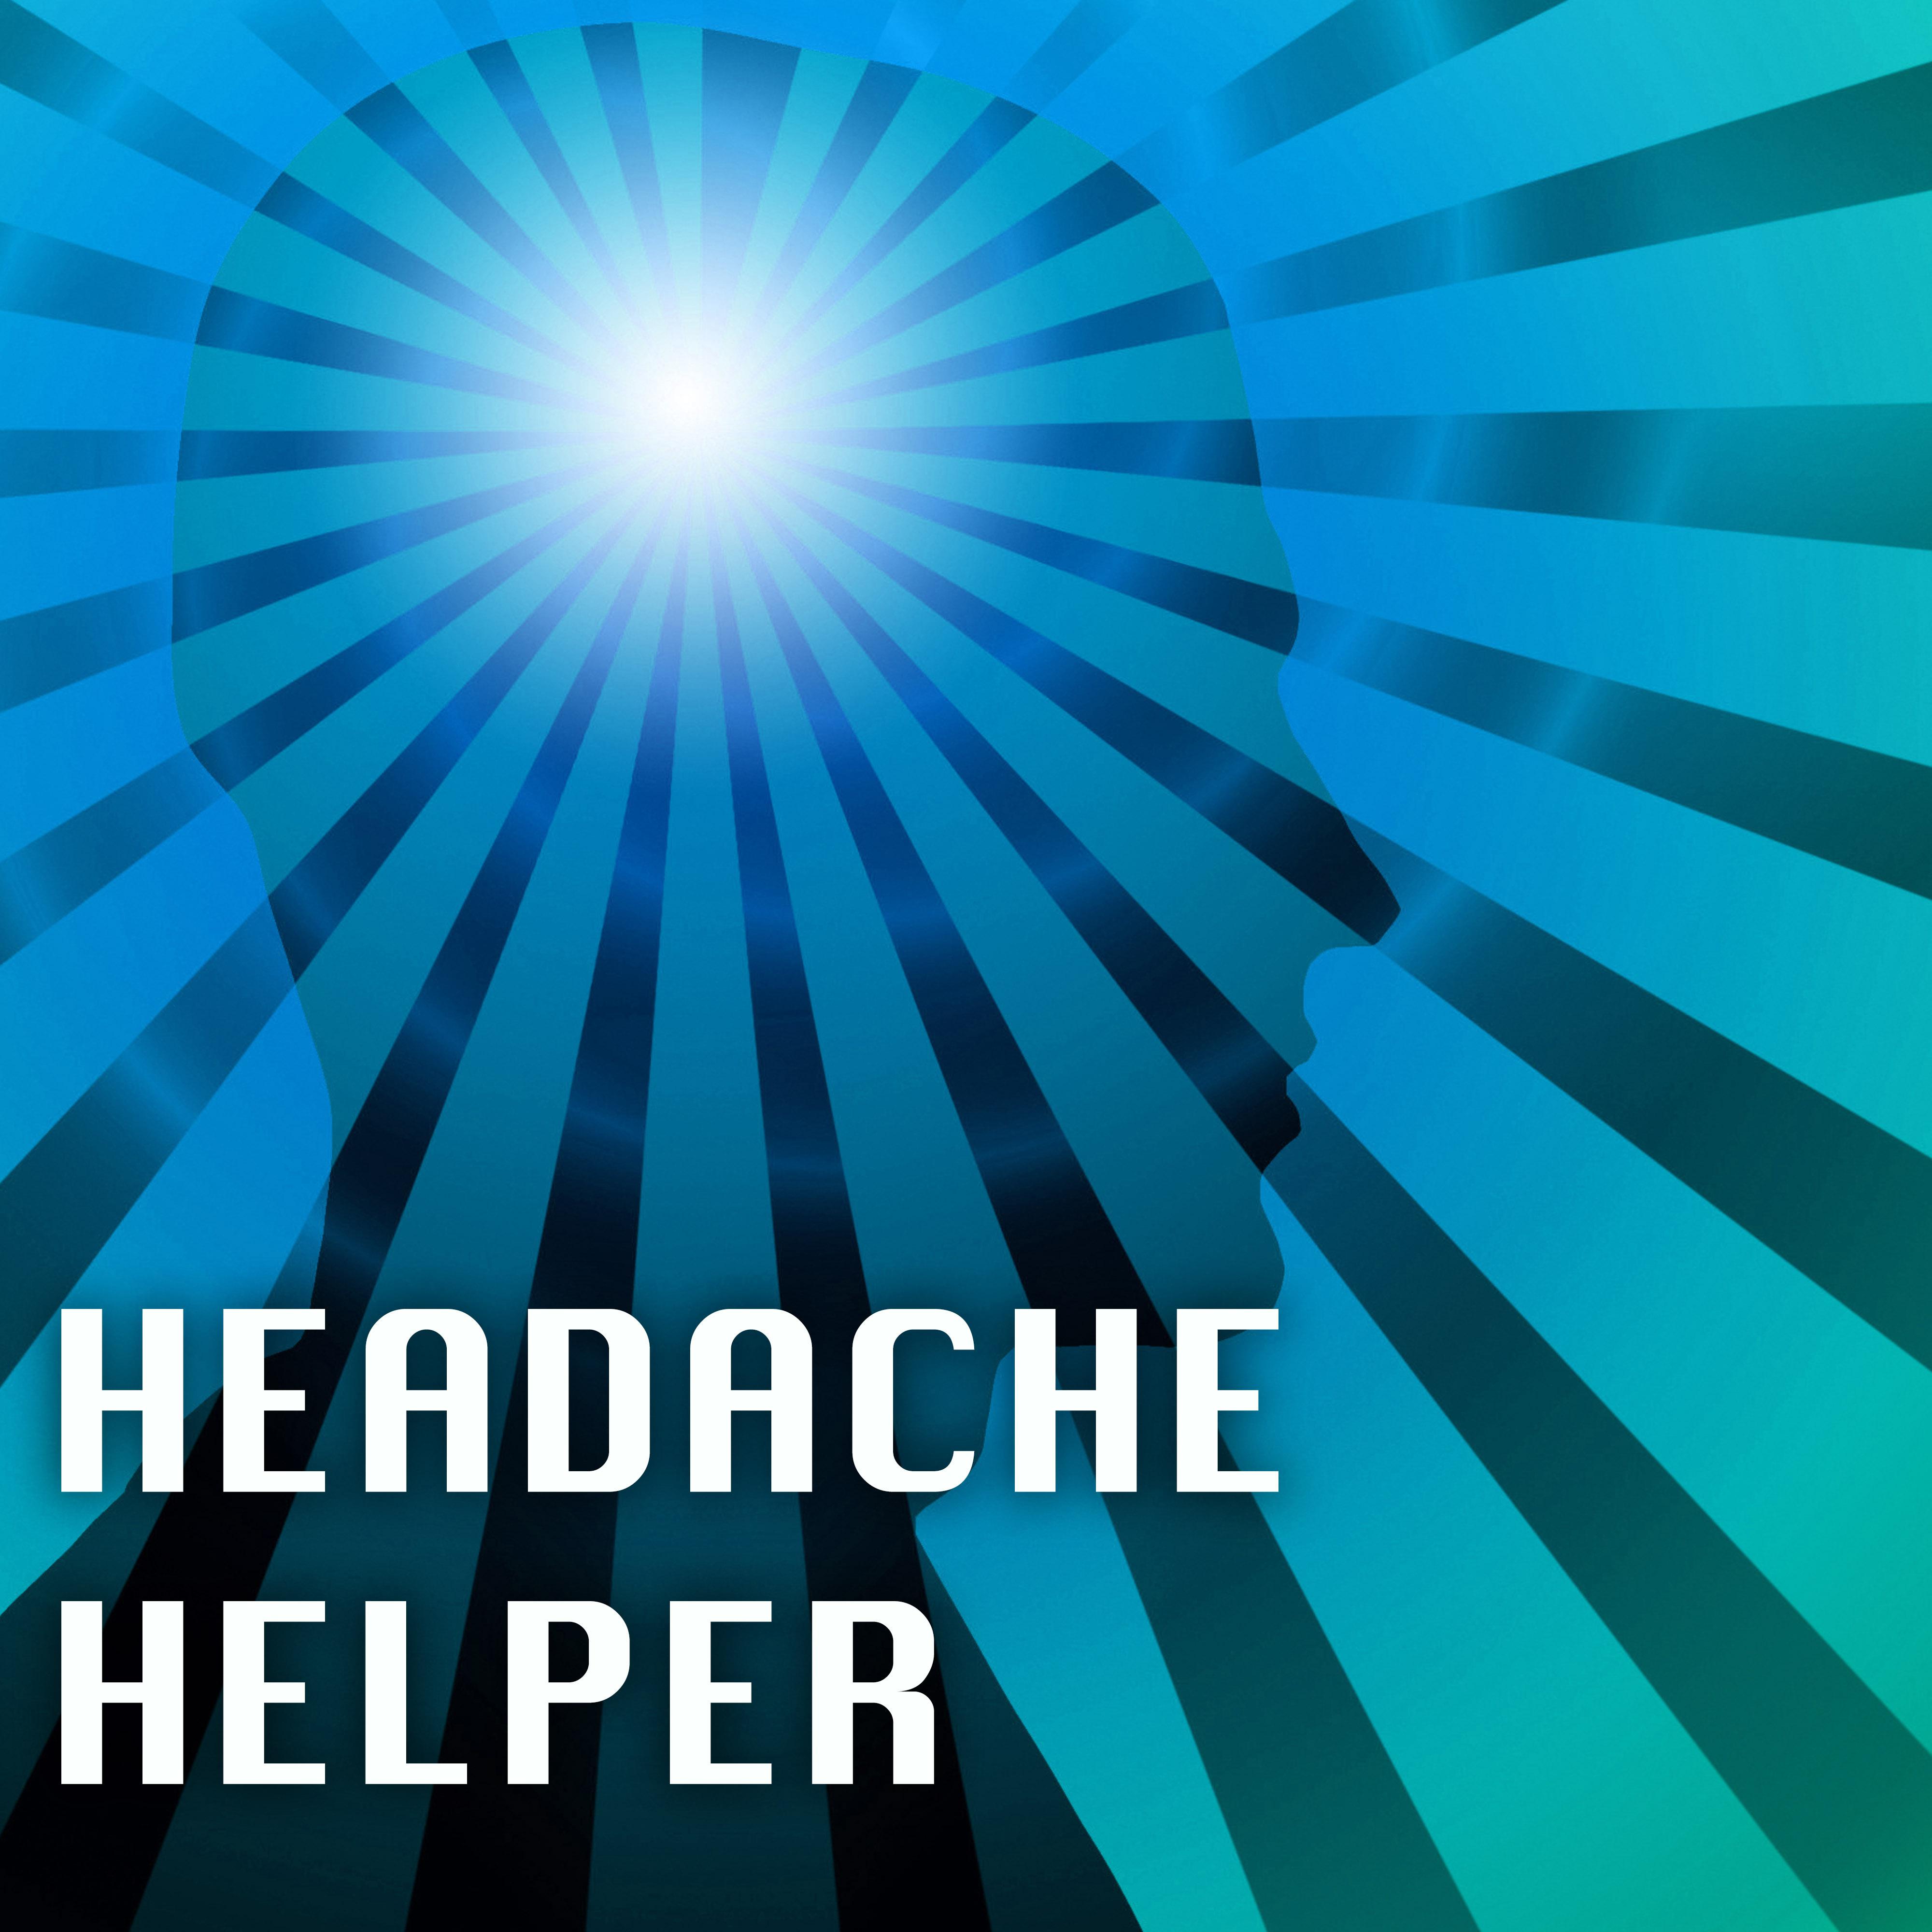 Headache Helper - Migraine Relief, Relieve Pain and Tinnitus with White Noise Sounds of Nature